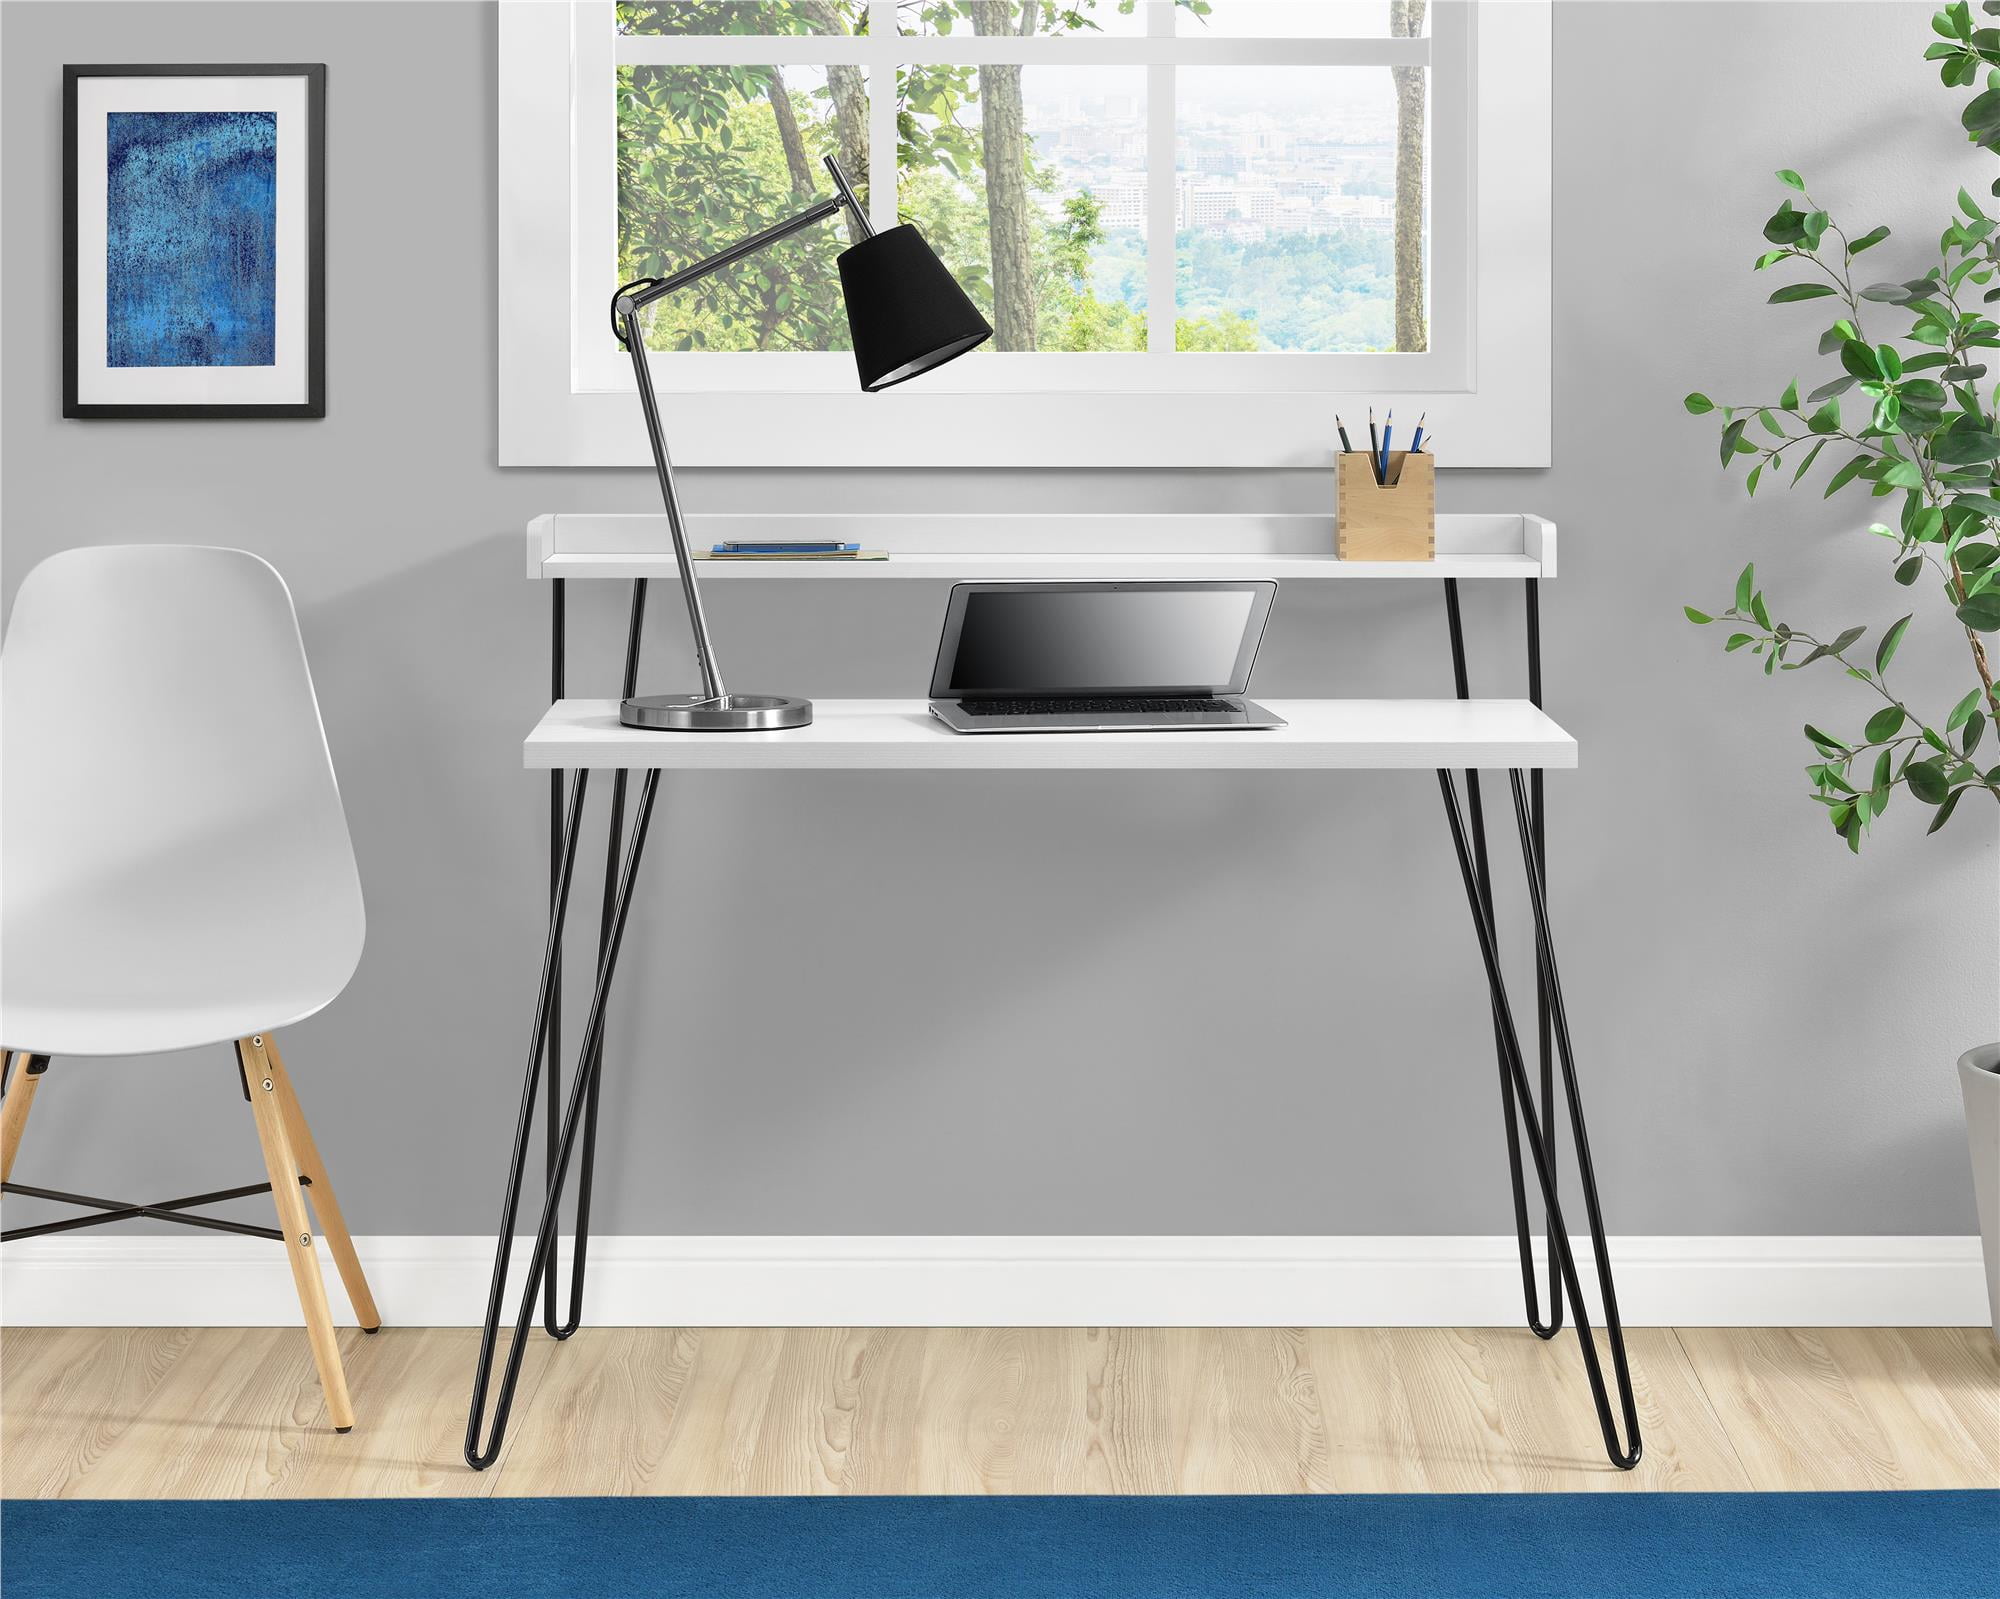 Mainstays Griffin Retro Computer Desk with Riser (White/Black) $43 + Free Shipping